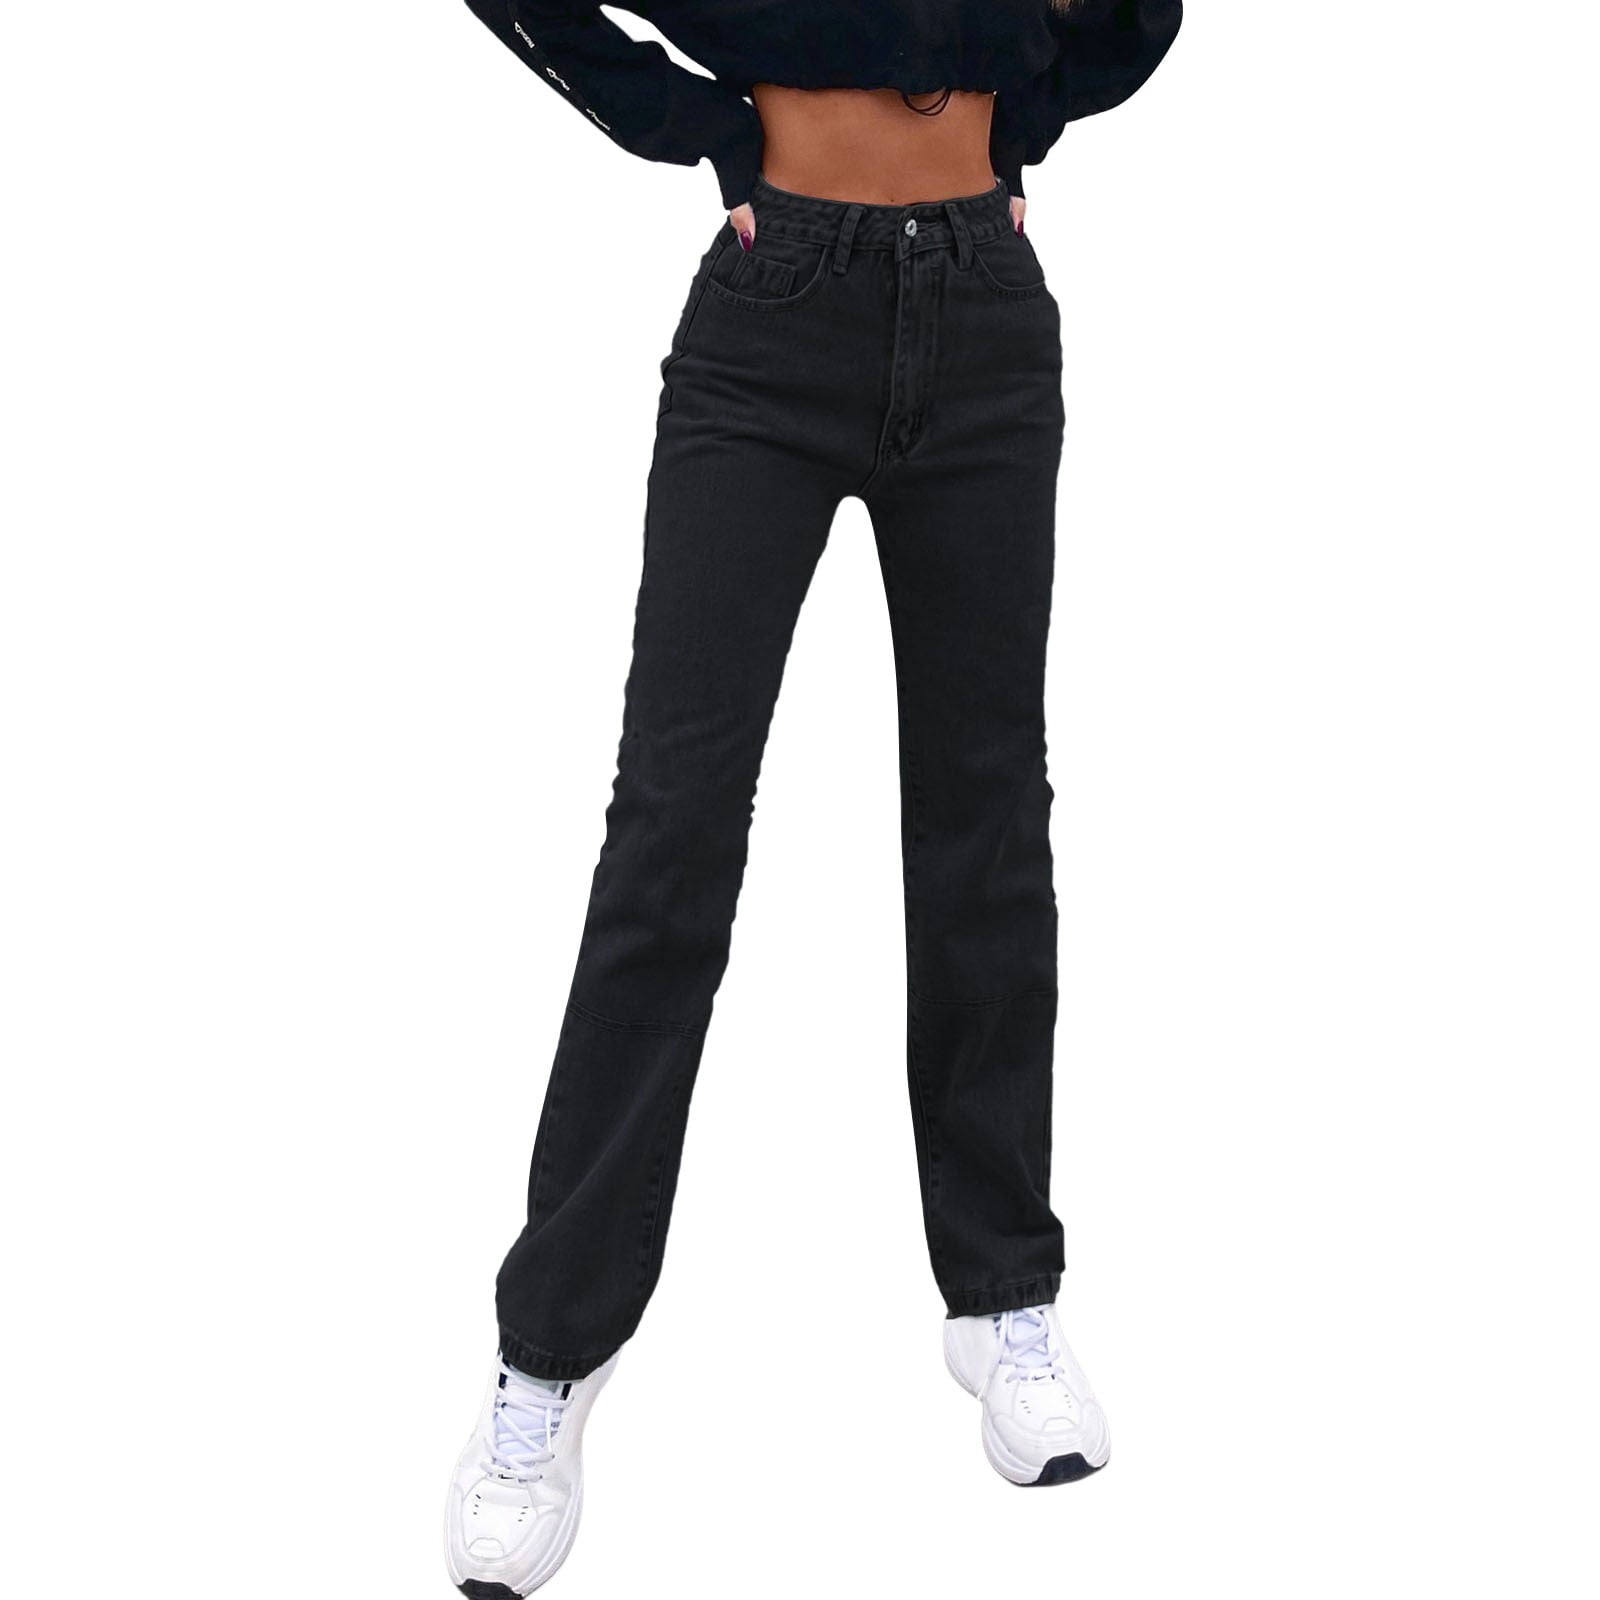 Buy ICNGLKSND Womens Girls High Waisted Baggy Jeans Straight